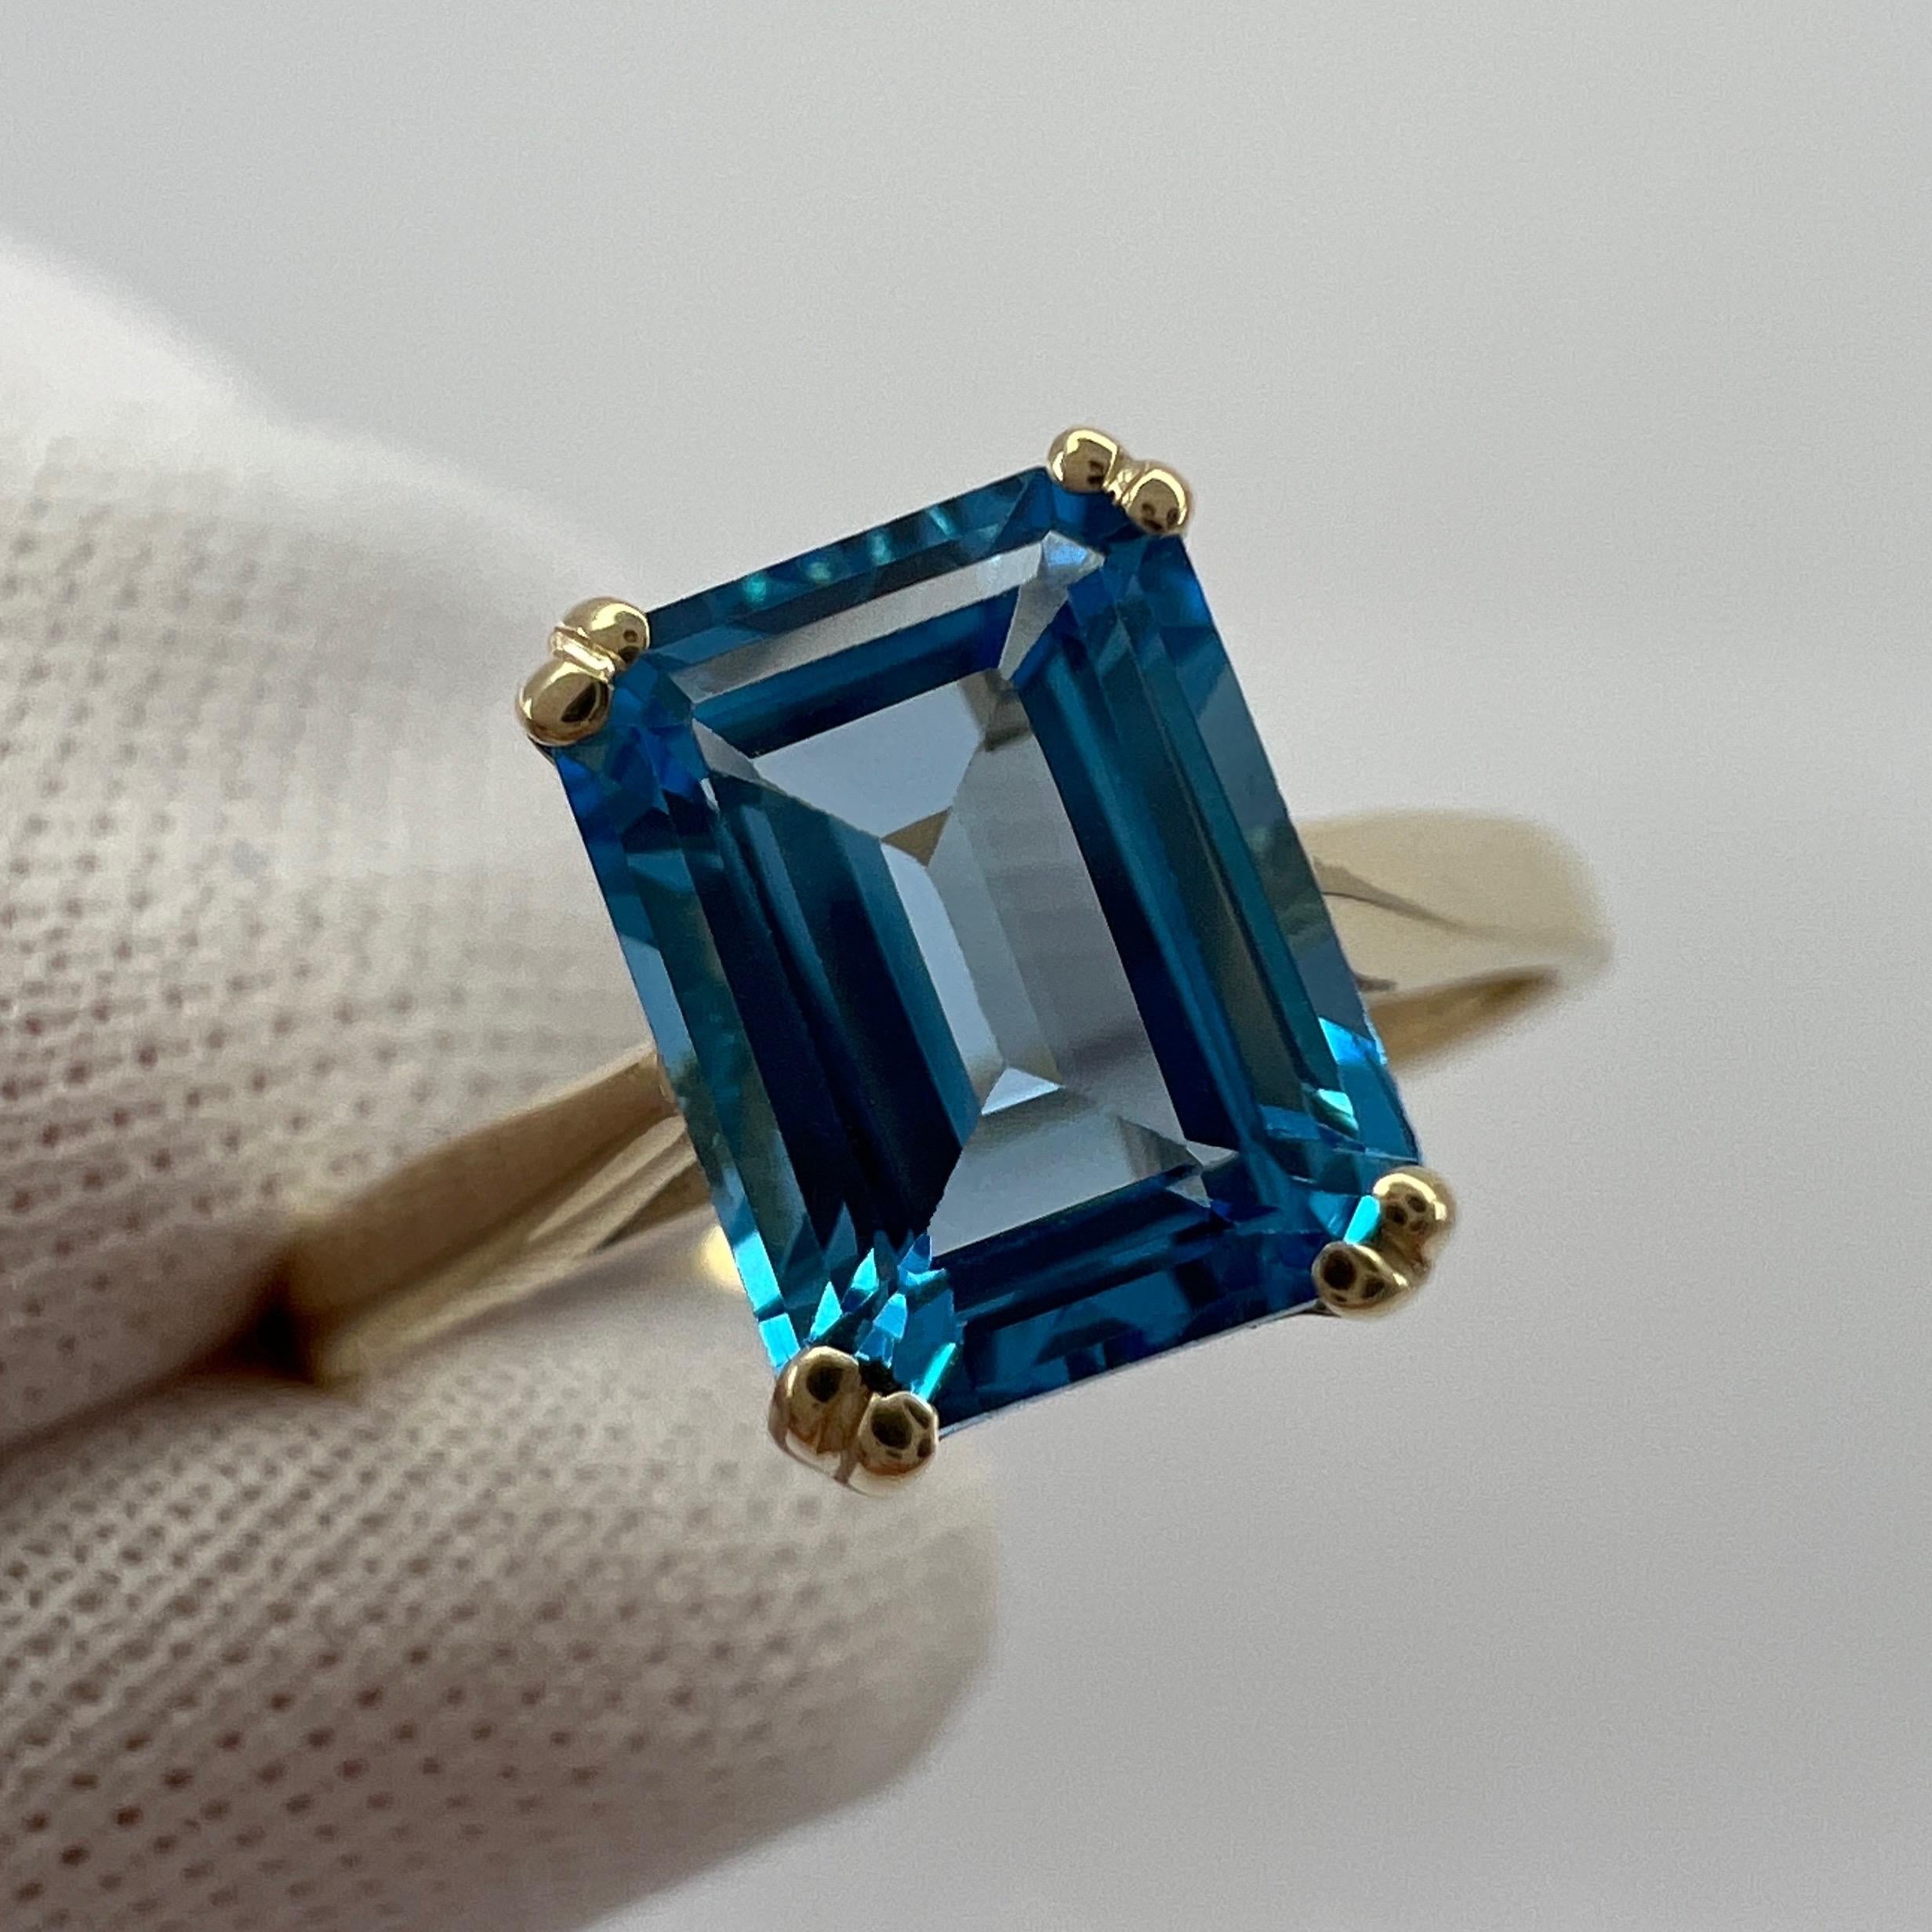 Emerald Octagonal Cut Vivid Swiss Blue Topaz Solitaire Ring.

2.00 Carat topaz with a stunning vivid swiss blue colour and excellent clarity, very clean stone. Also has an excellent quality emerald octagonal cut which shows the fine colour to best